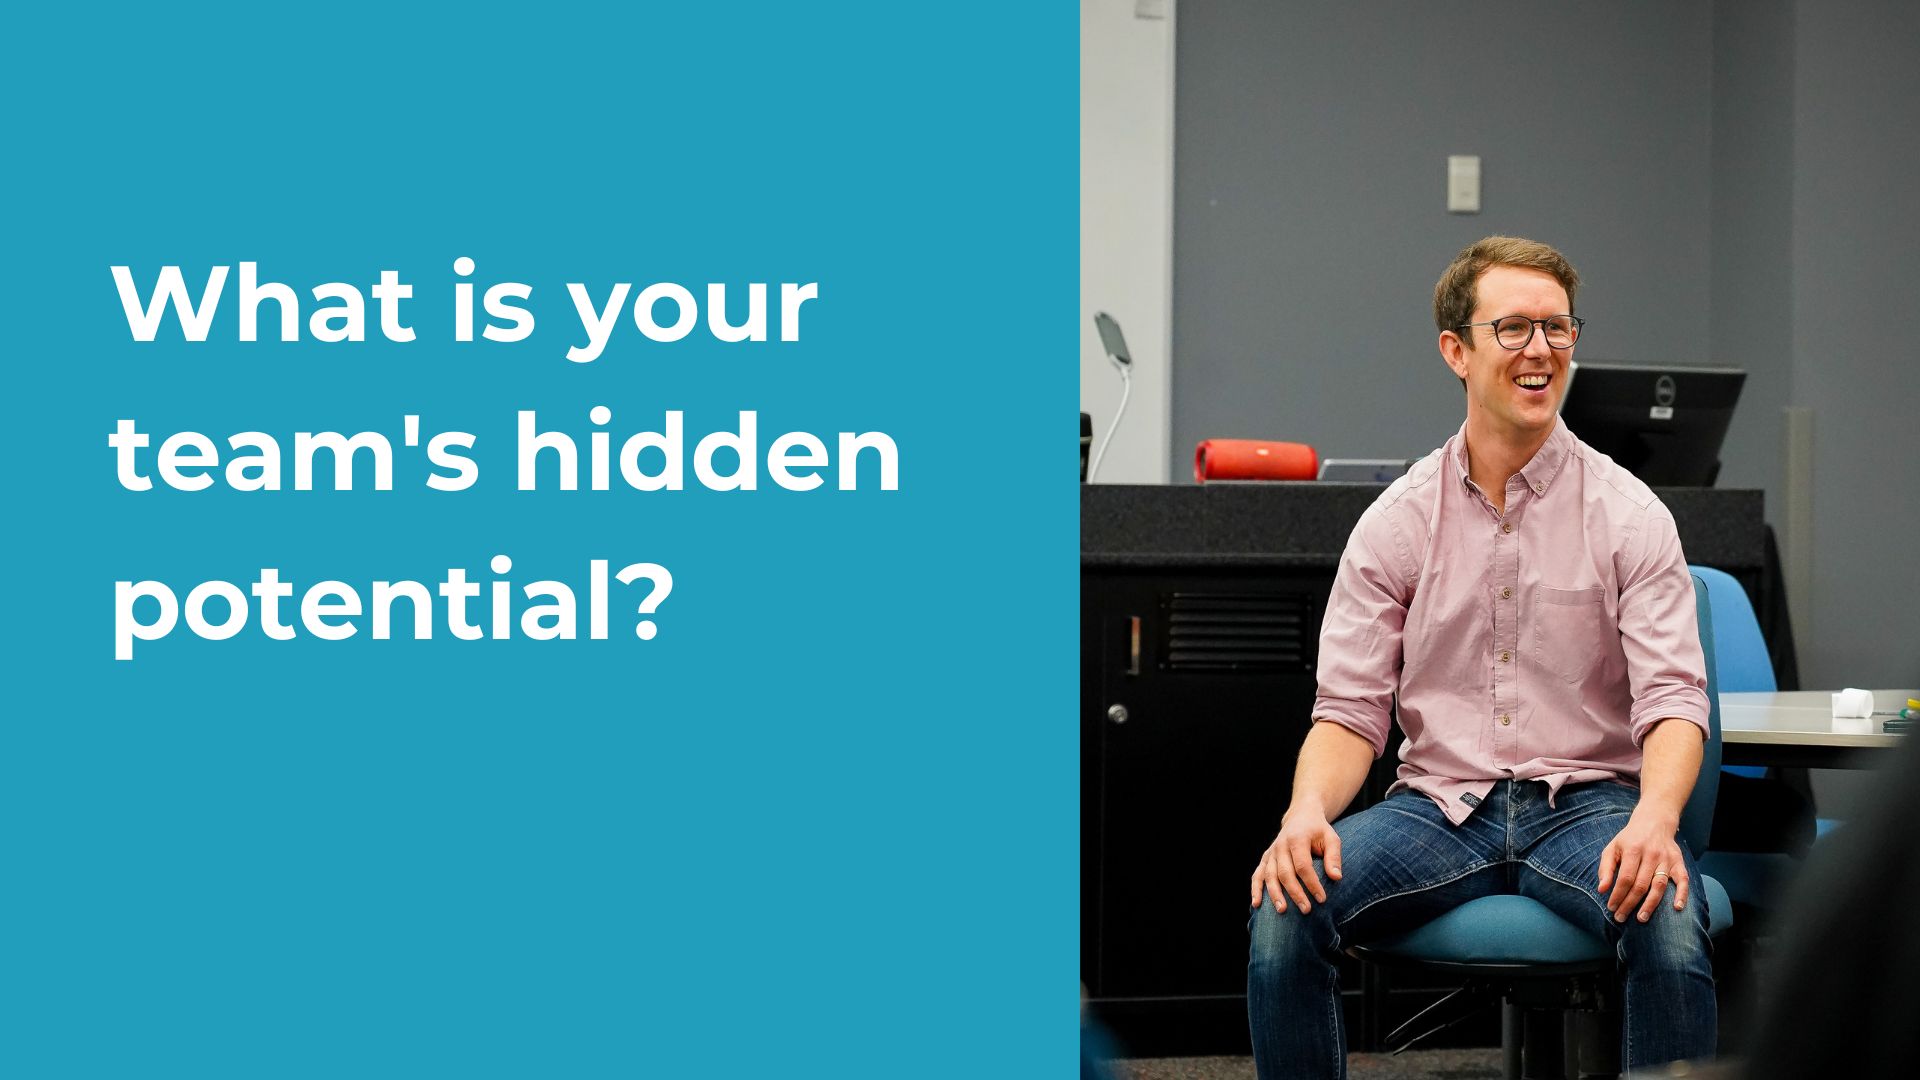 What is your team's hidden potential?